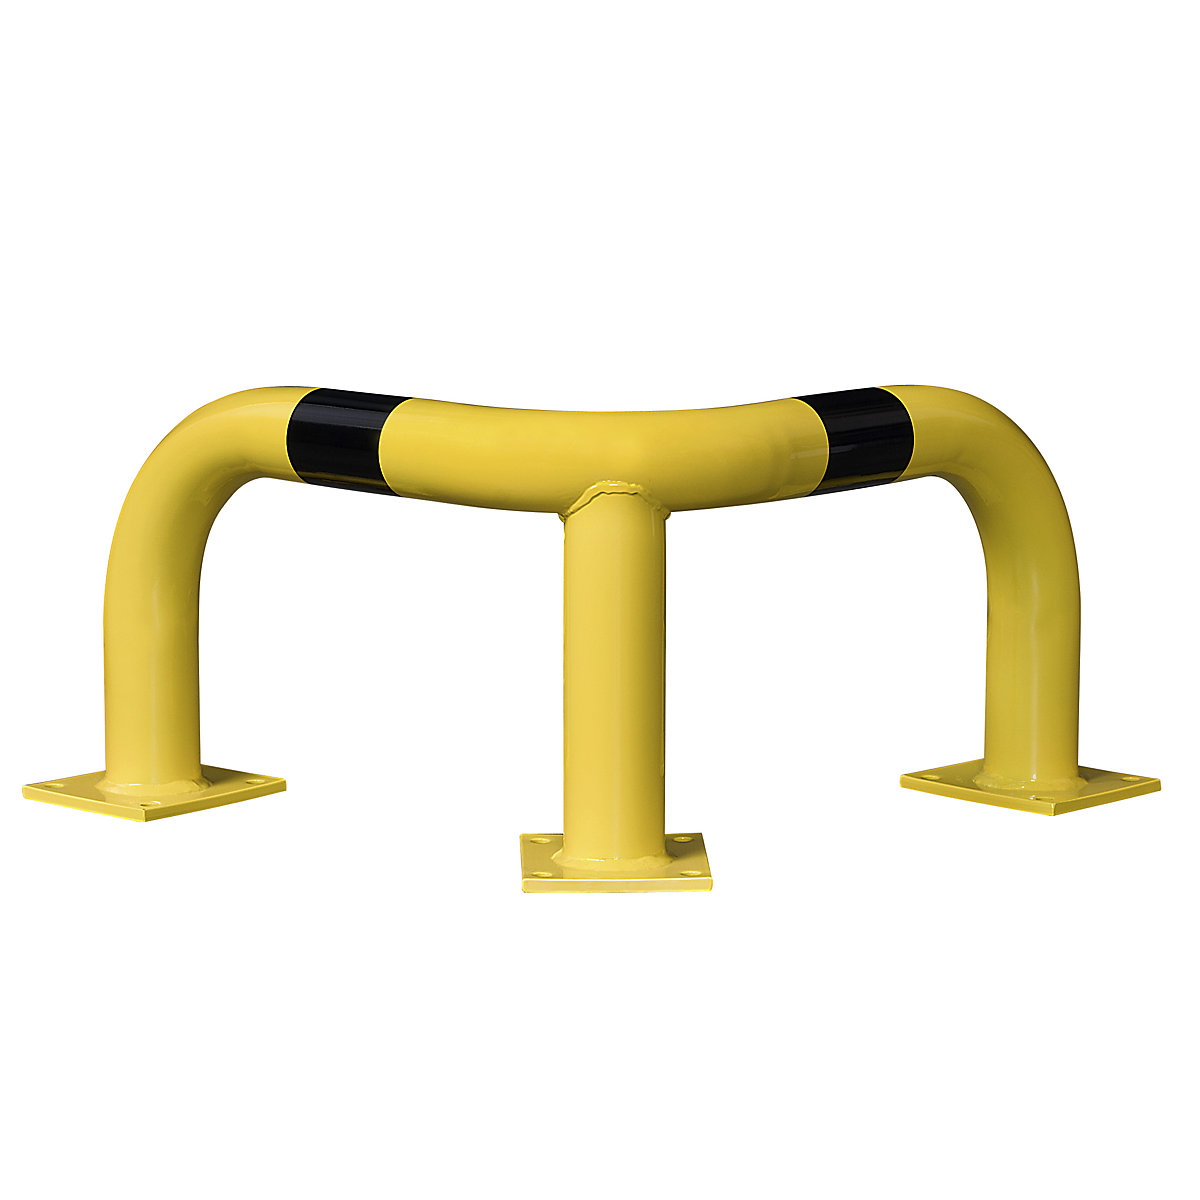 Crash protection corner, Ø 76 mm, for indoor use, height 350 mm, yellow/black